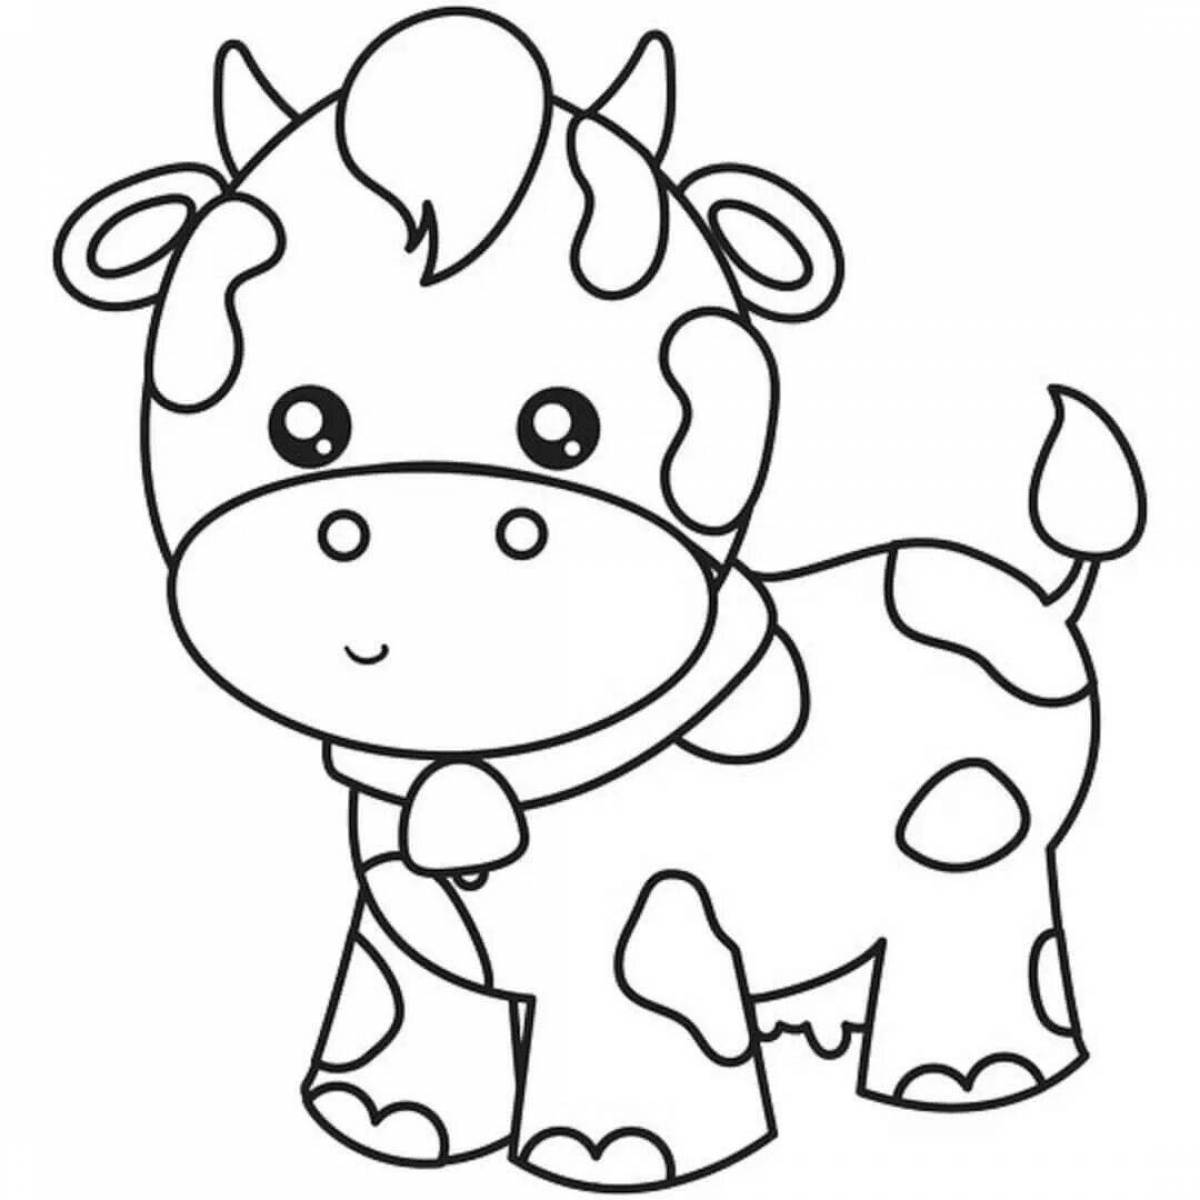 Coloring page nice cow for children 5-6 years old